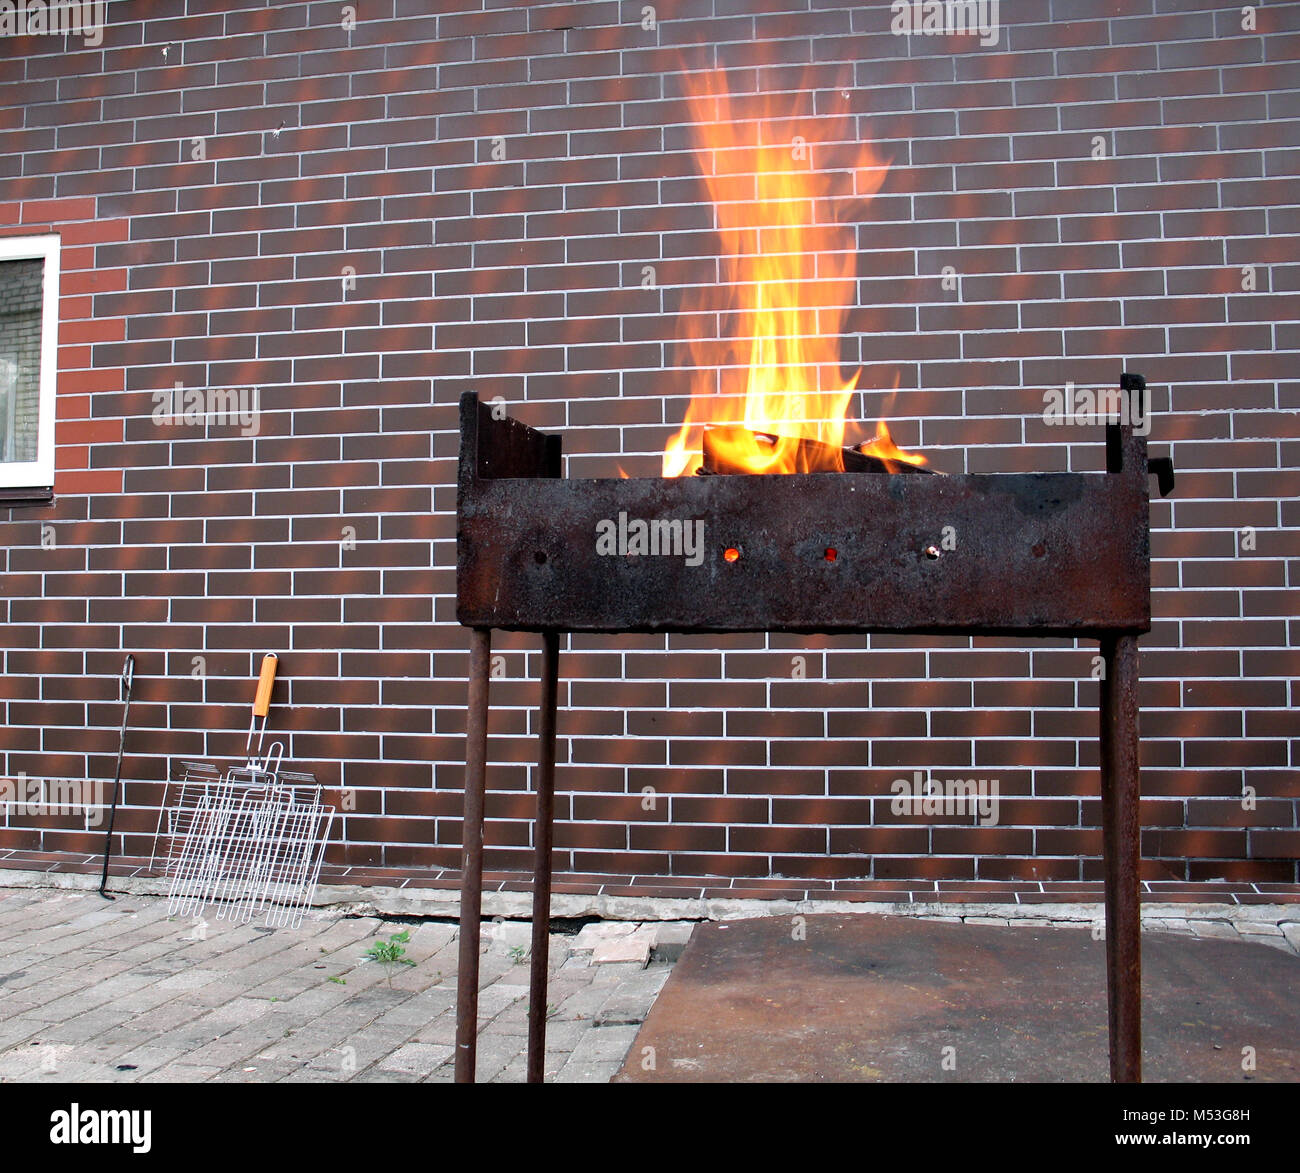 Firewood and fire in the old rusty charcoal grill on brick wall background Stock Photo